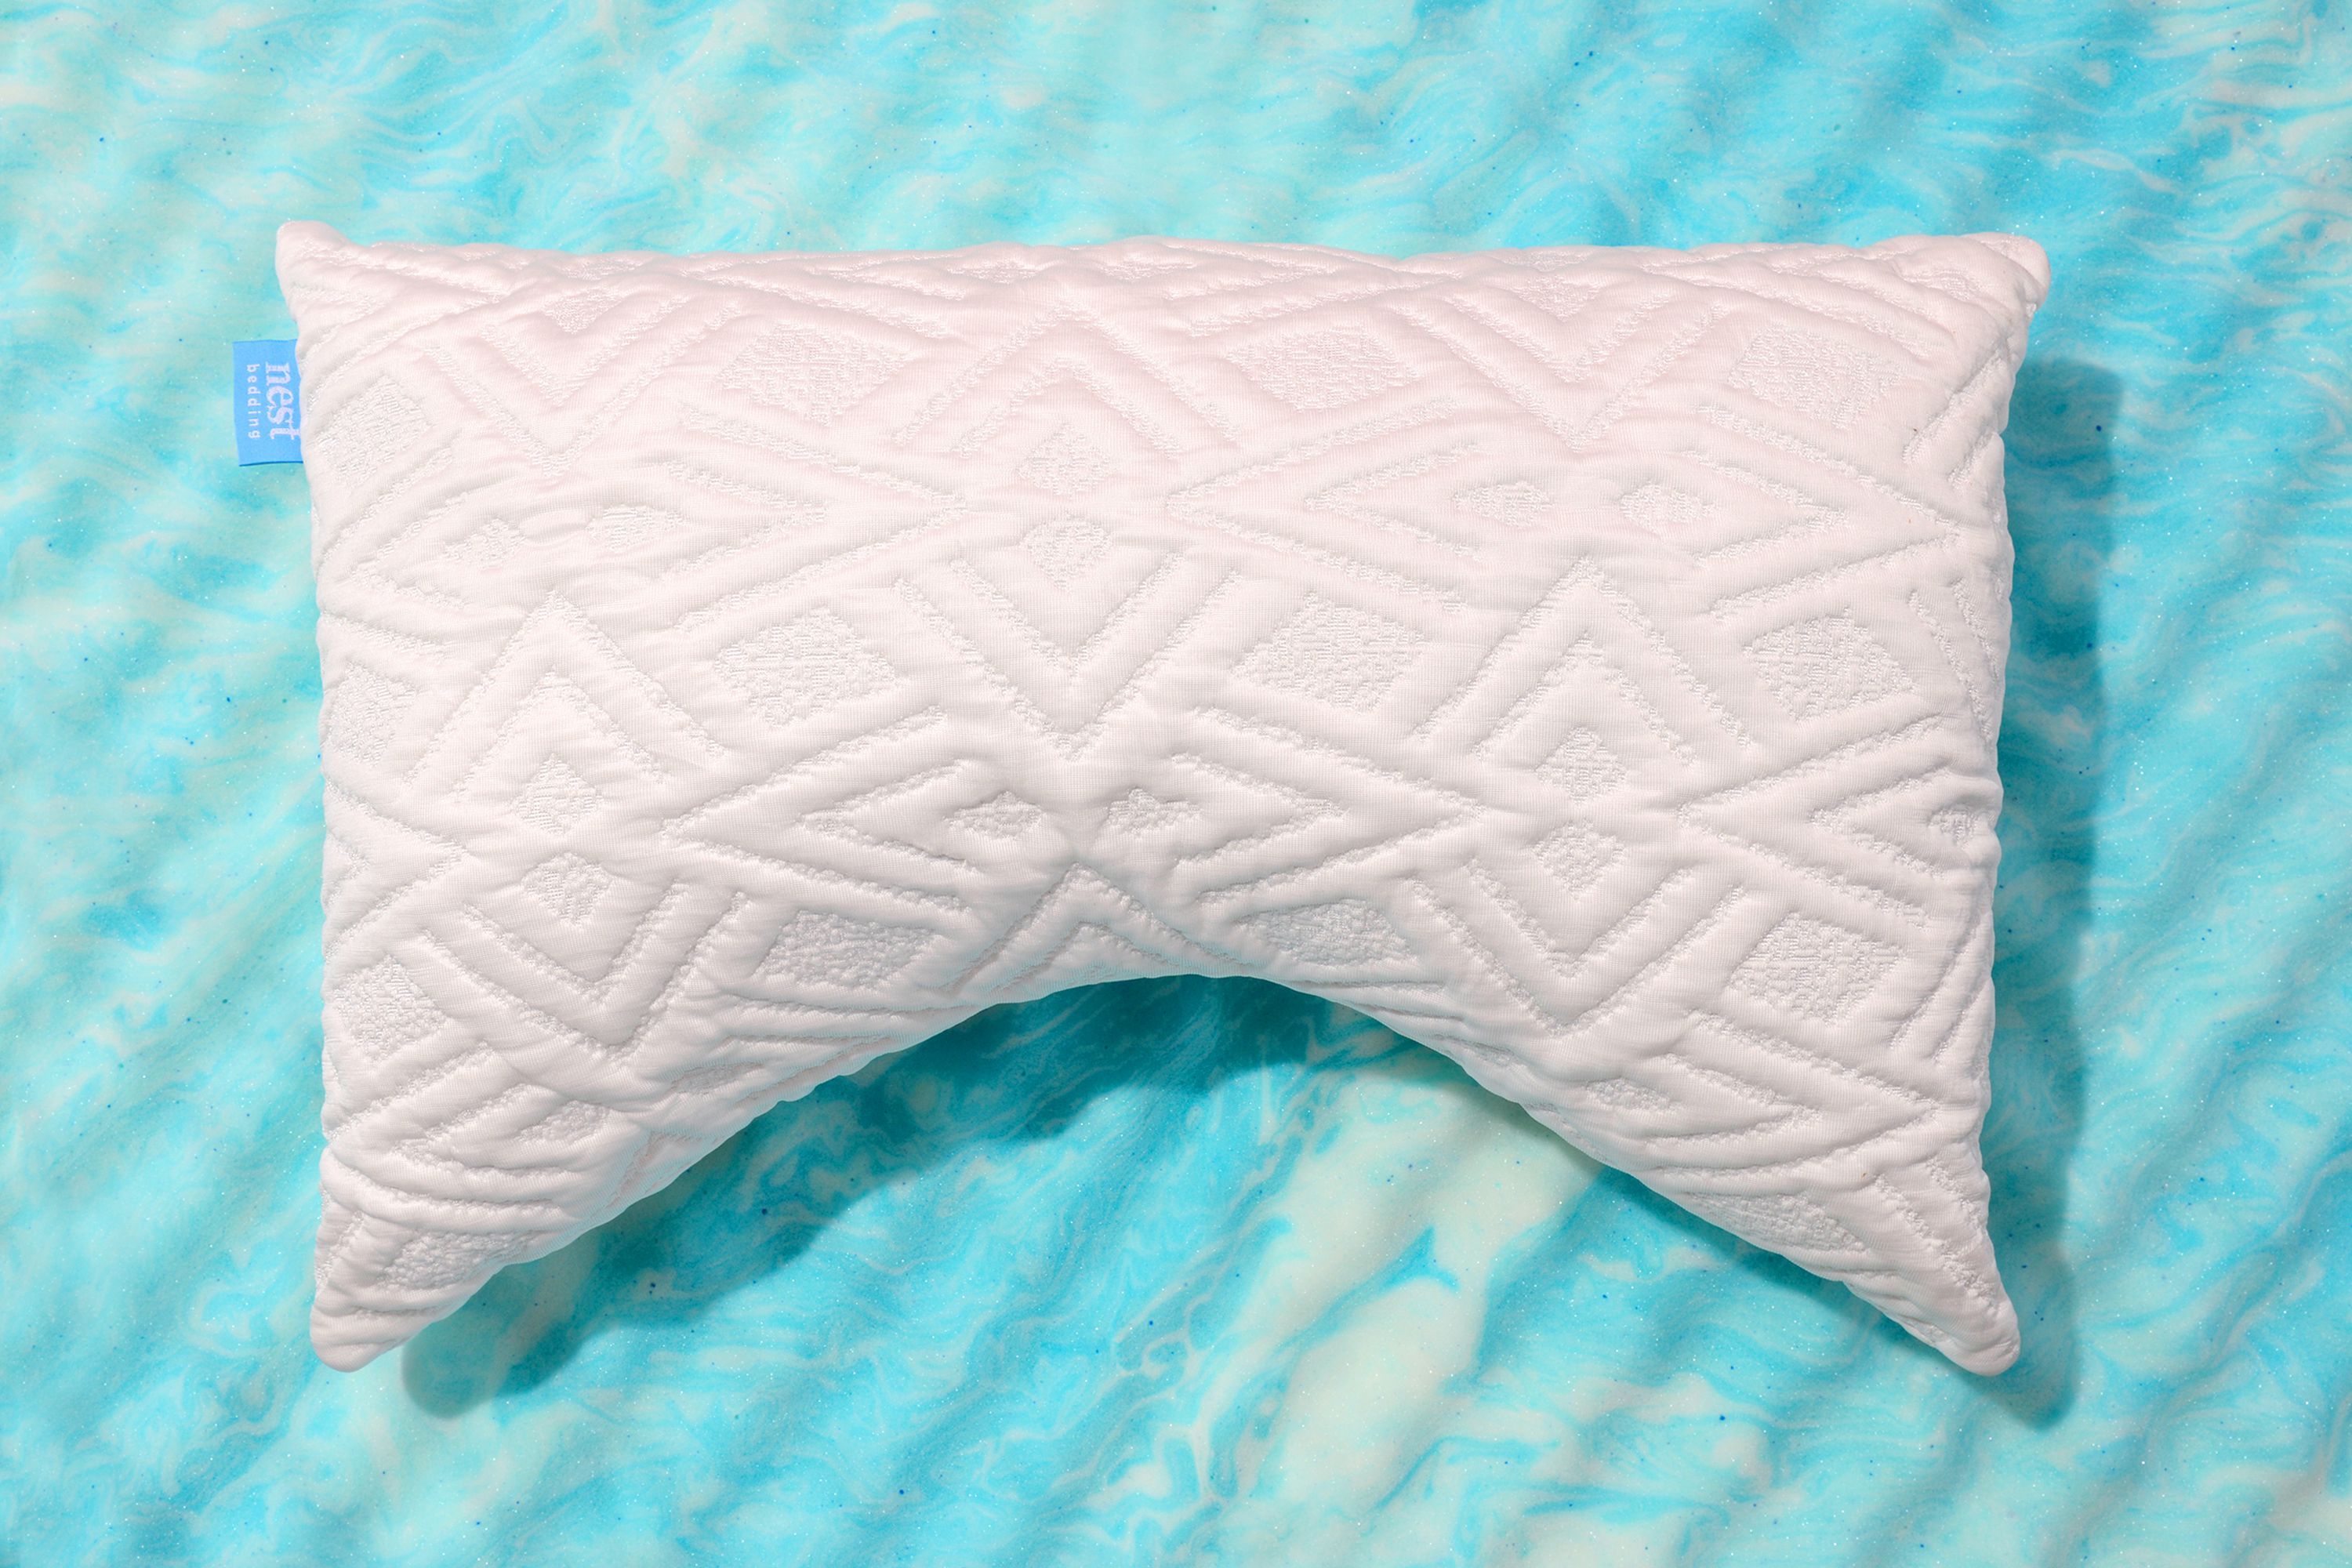 icy cool pillow